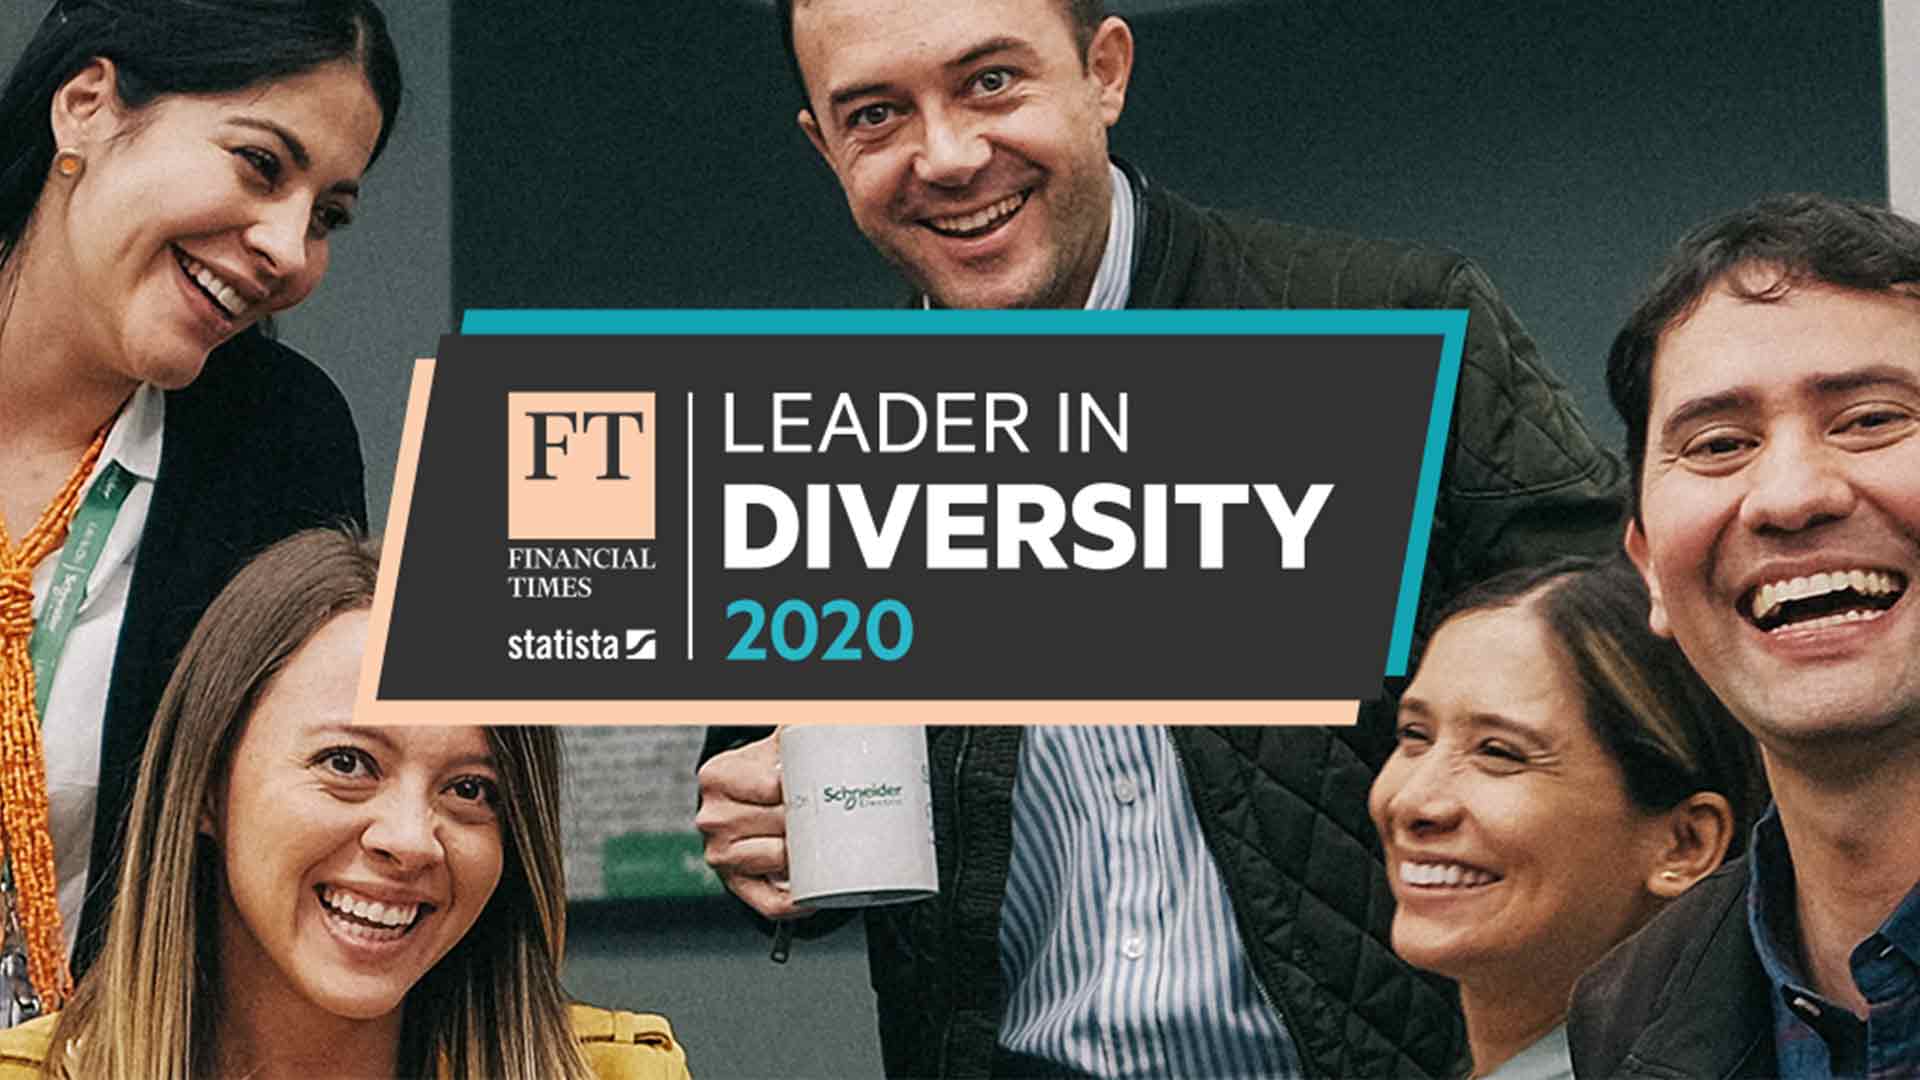 Financial Times Leader in Diversity Award 2020 logo overlay on an image of a employee group